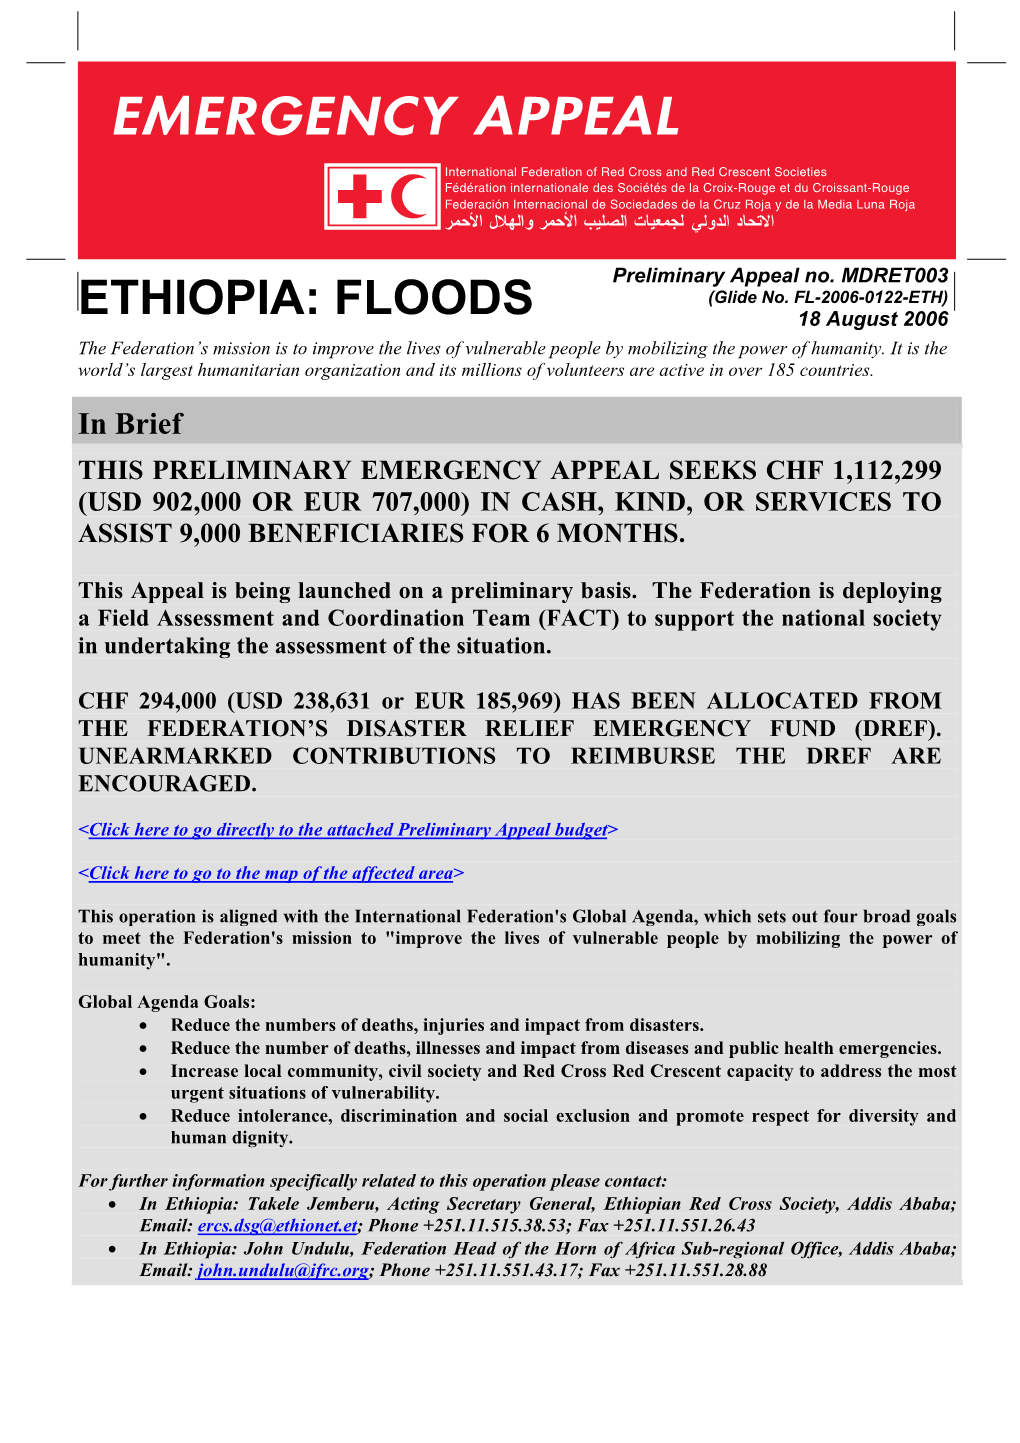 ETHIOPIA: FLOODS 18 August 2006 the Federation’S Mission Is to Improve the Lives of Vulnerable People by Mobilizing the Power of Humanity